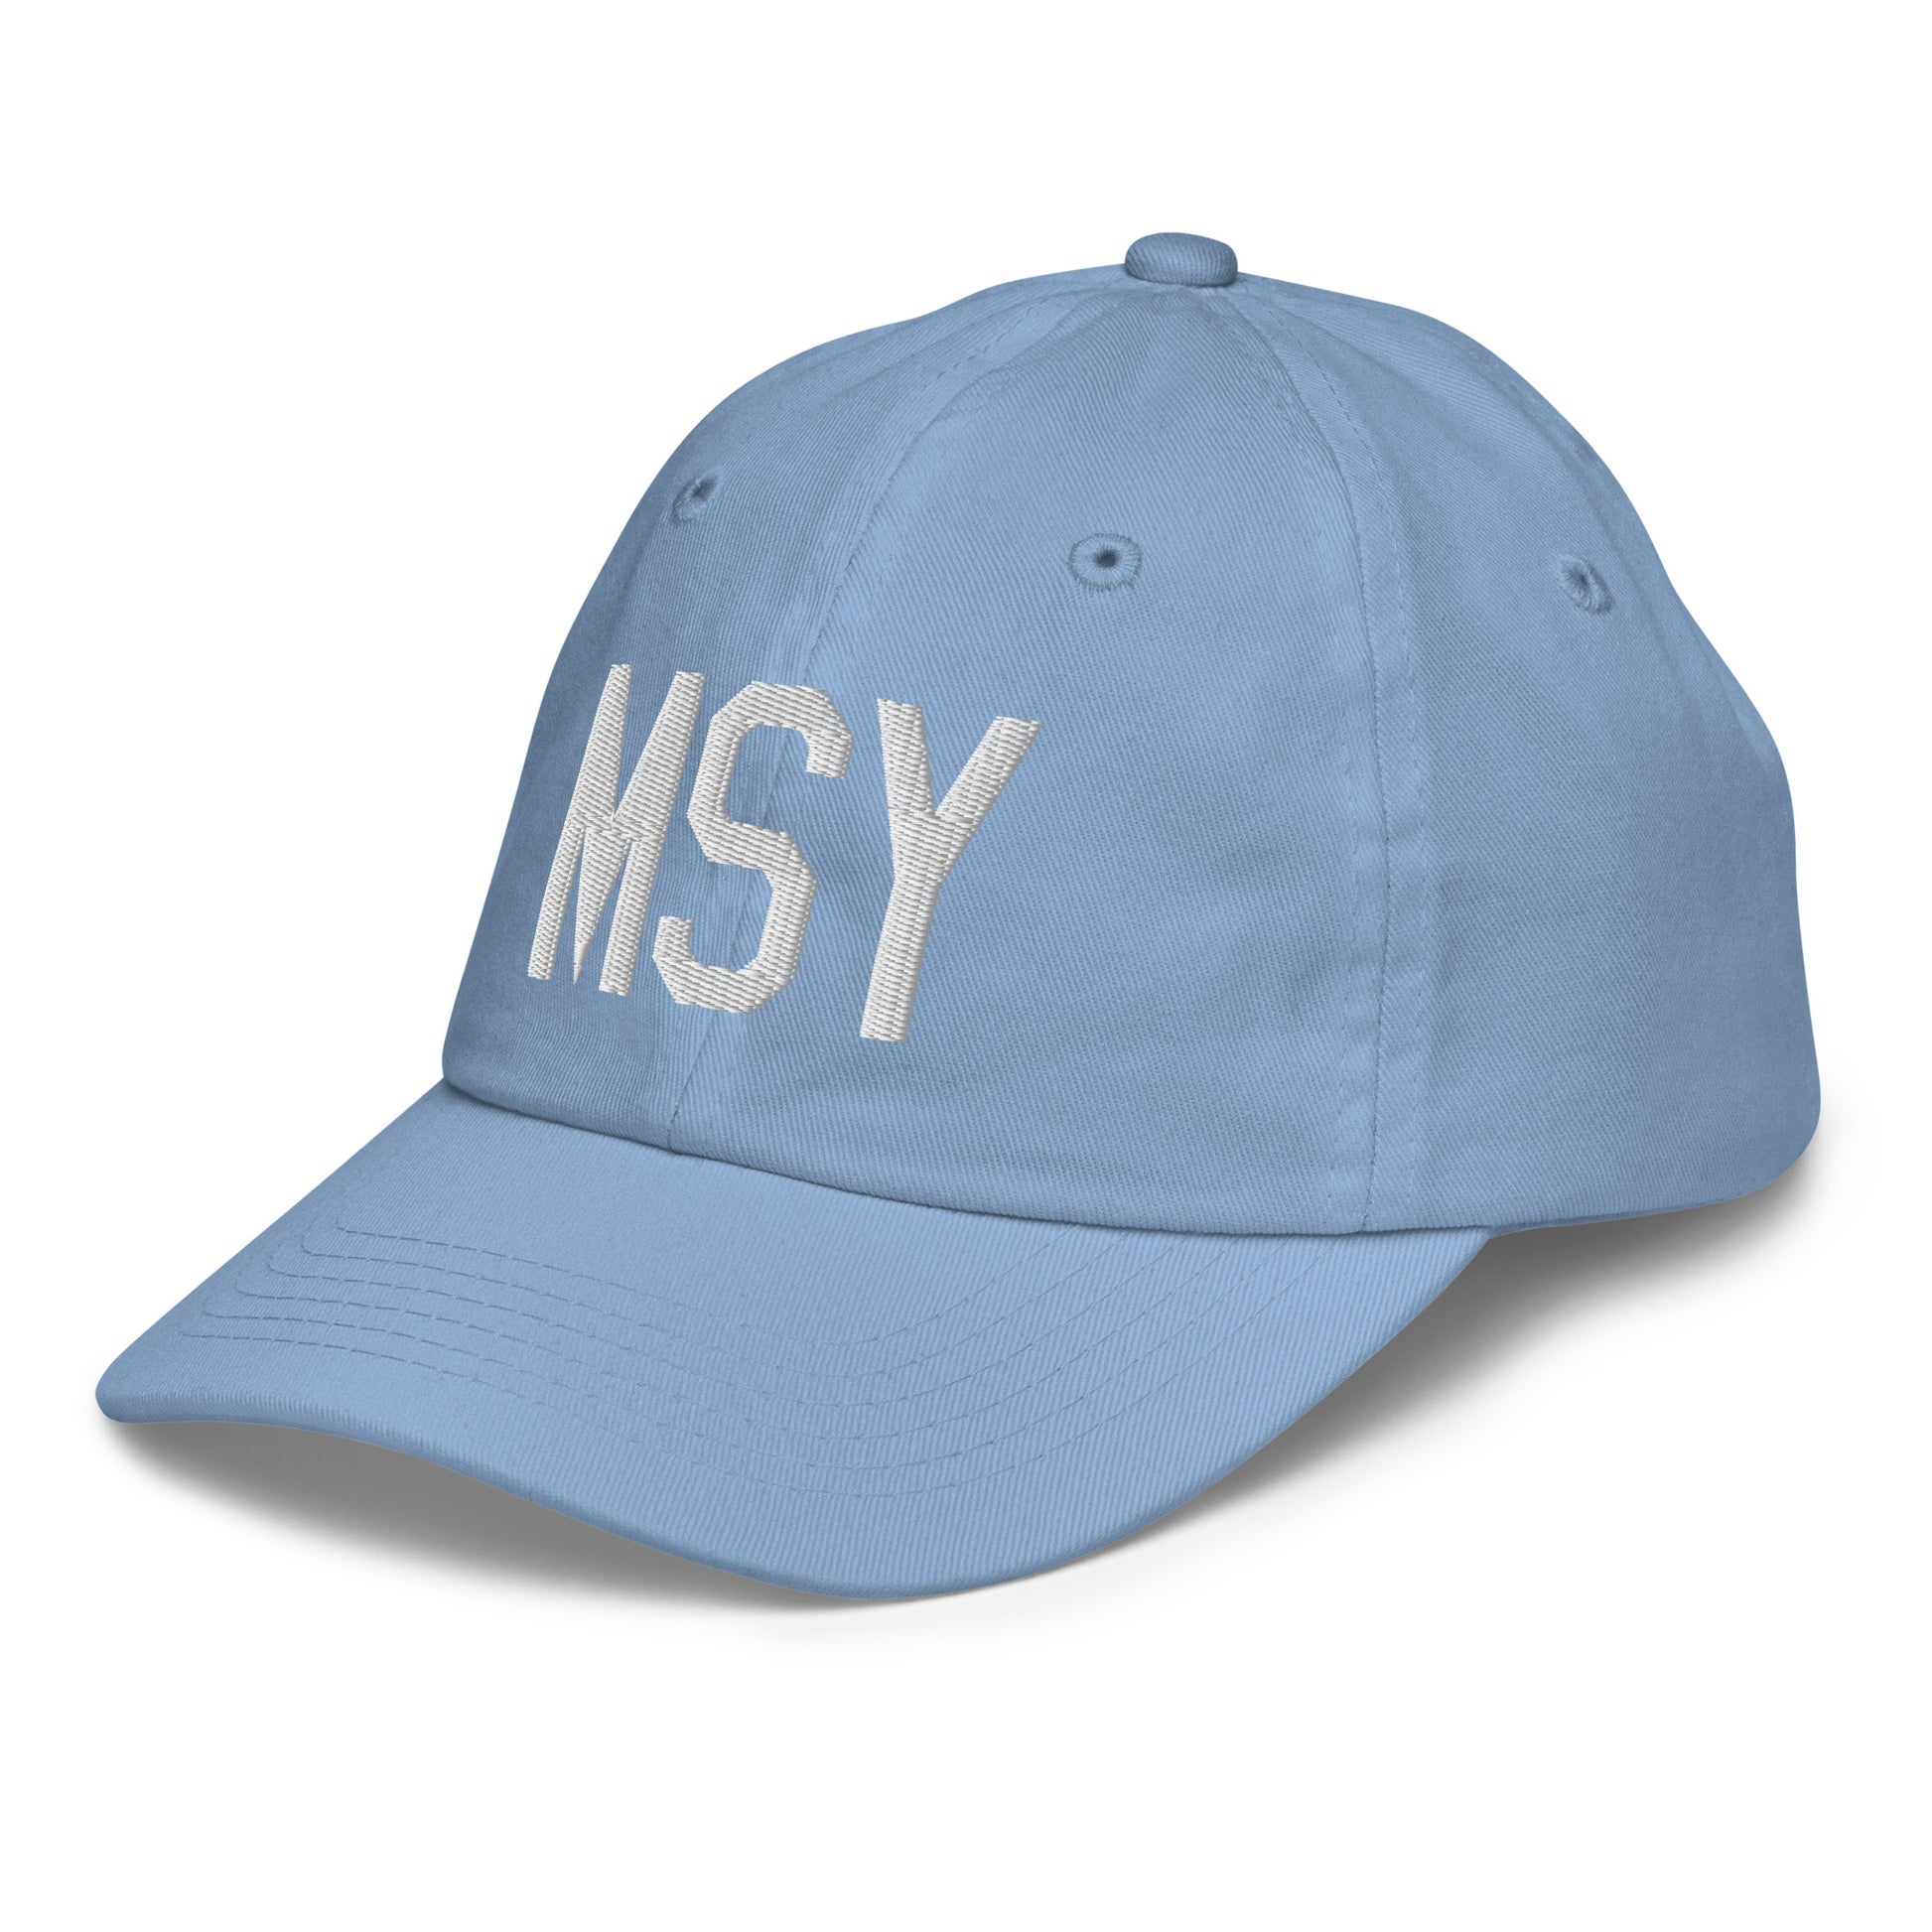 Airport Code Kid's Baseball Cap - White • MSY New Orleans • YHM Designs - Image 24